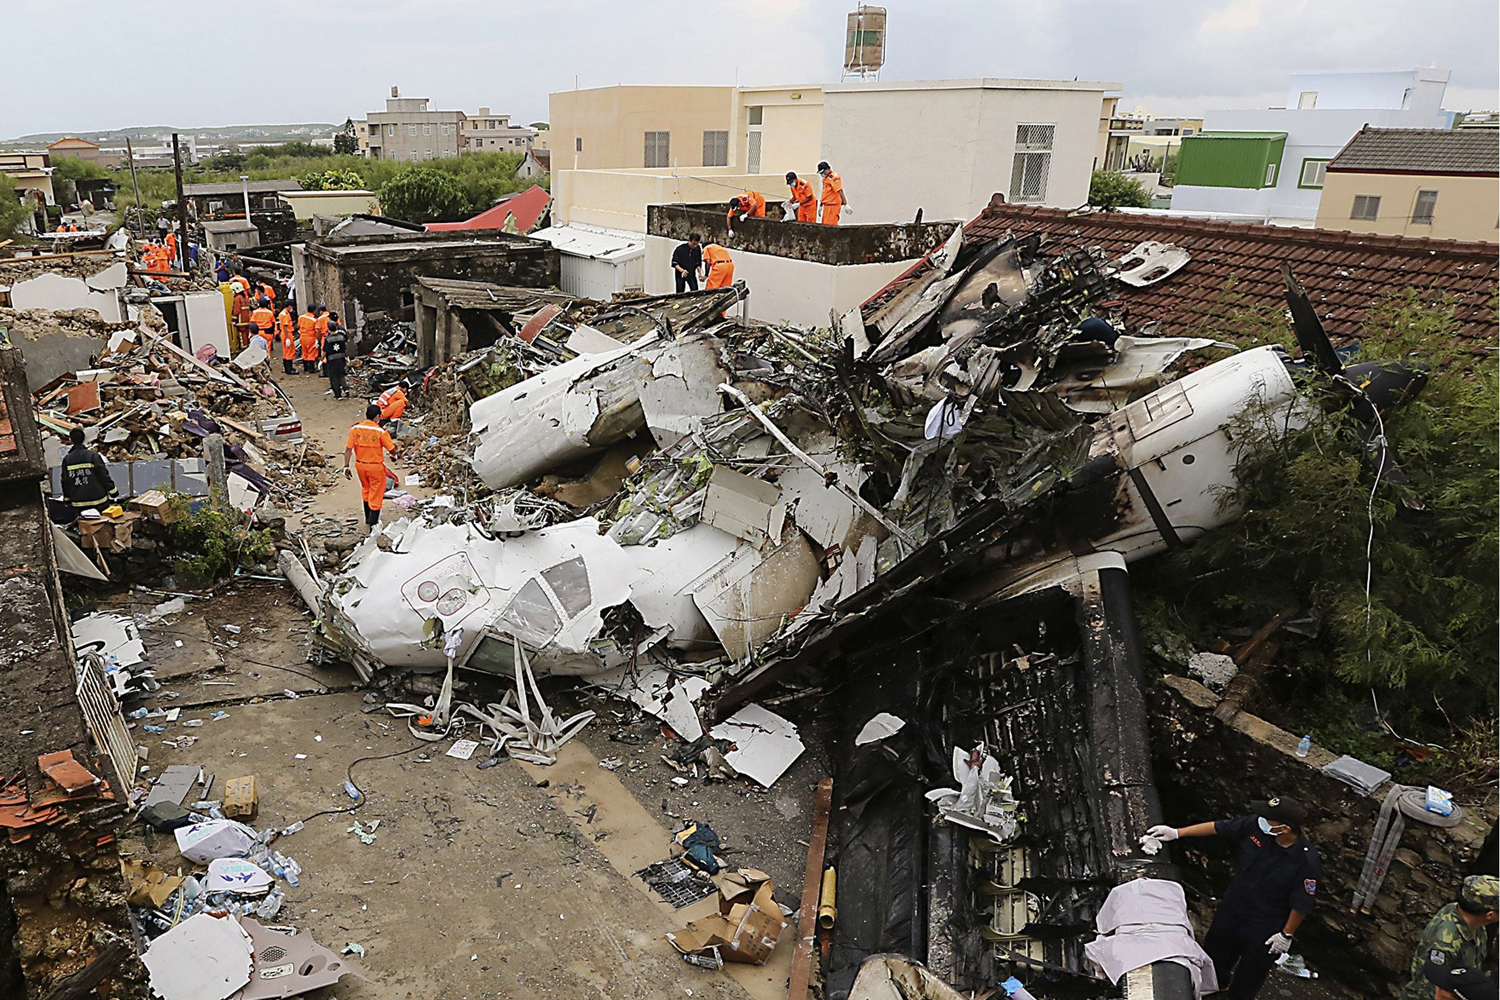 Rescue personnel survey the wreckage of a TransAsia Airways turboprop plane that crashed on Penghu island